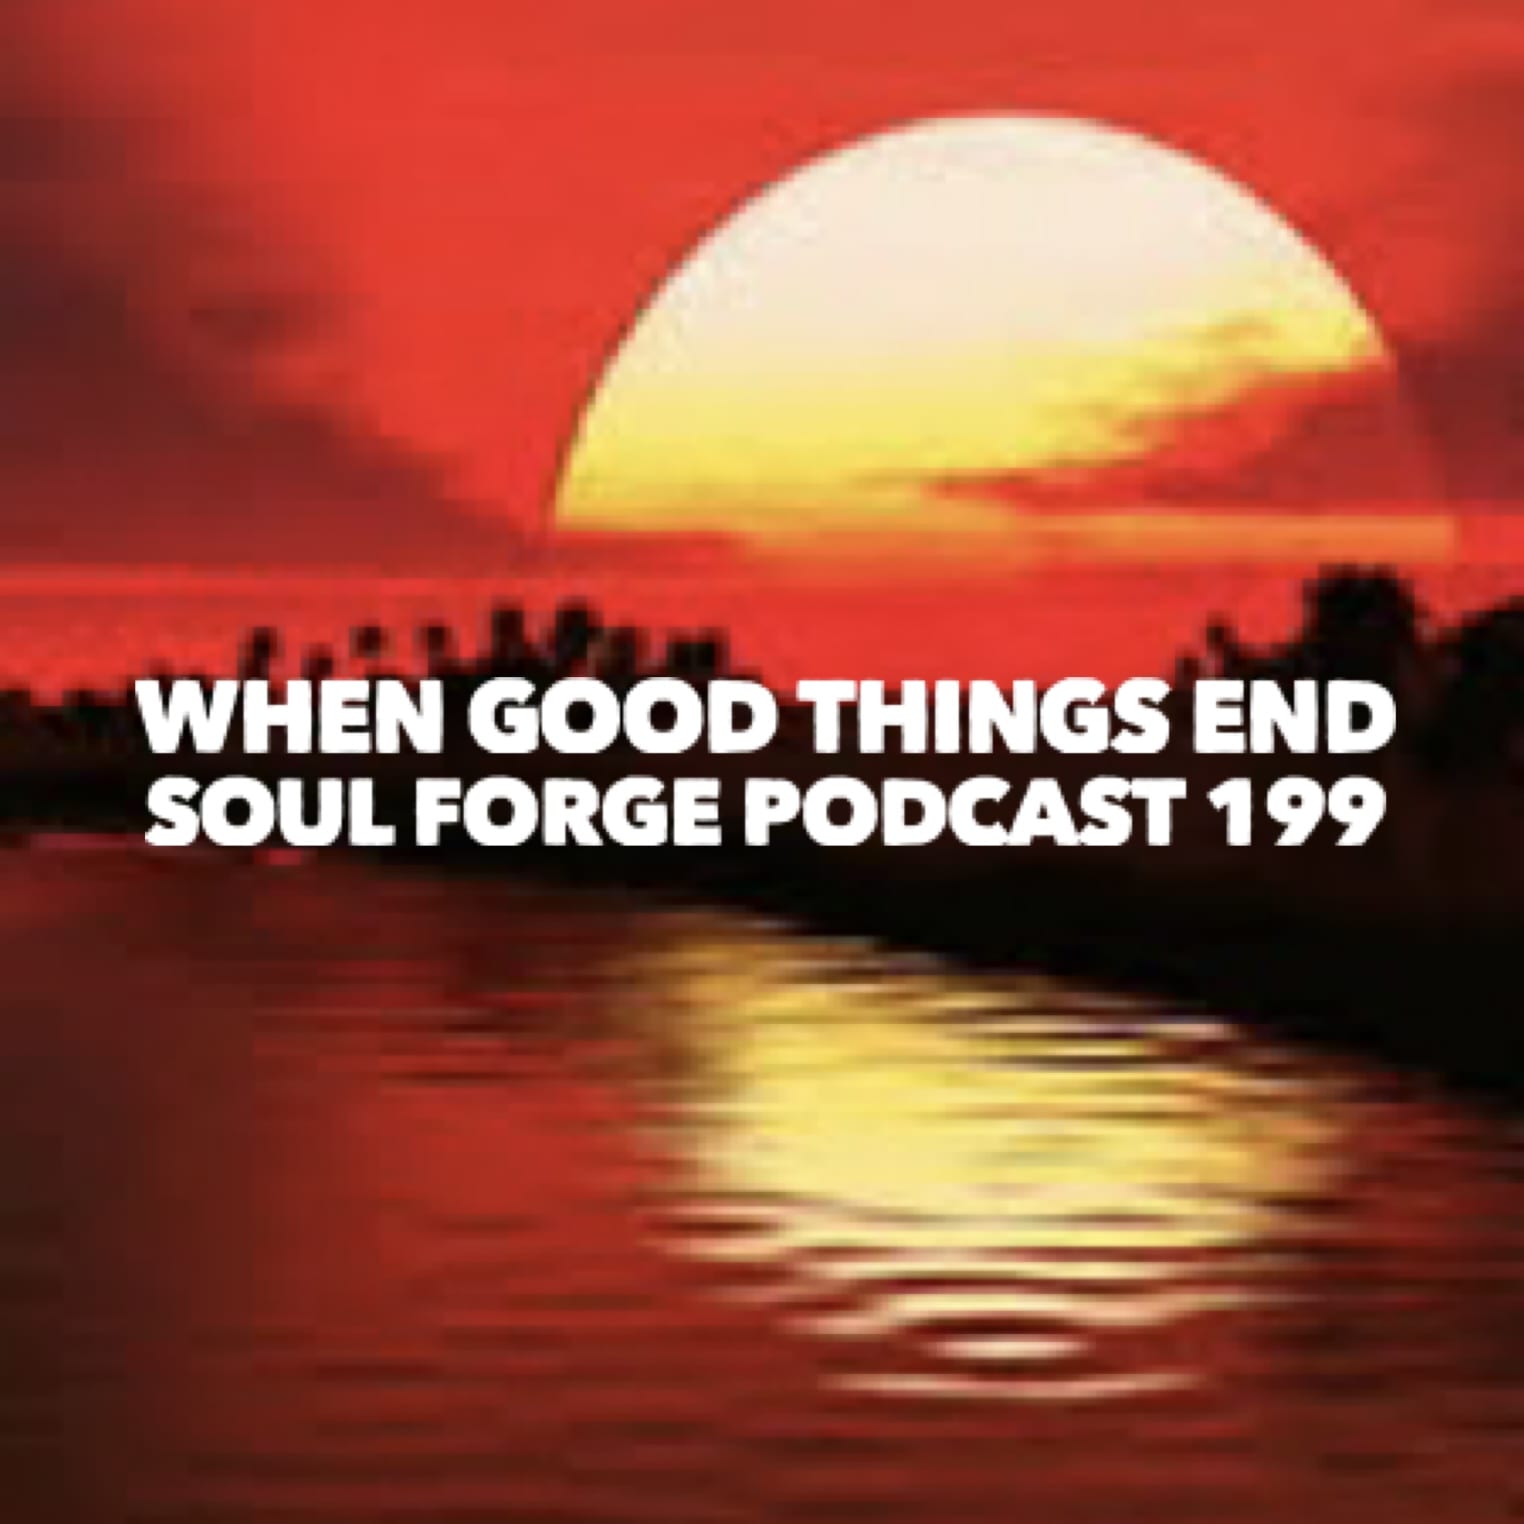 When good things end